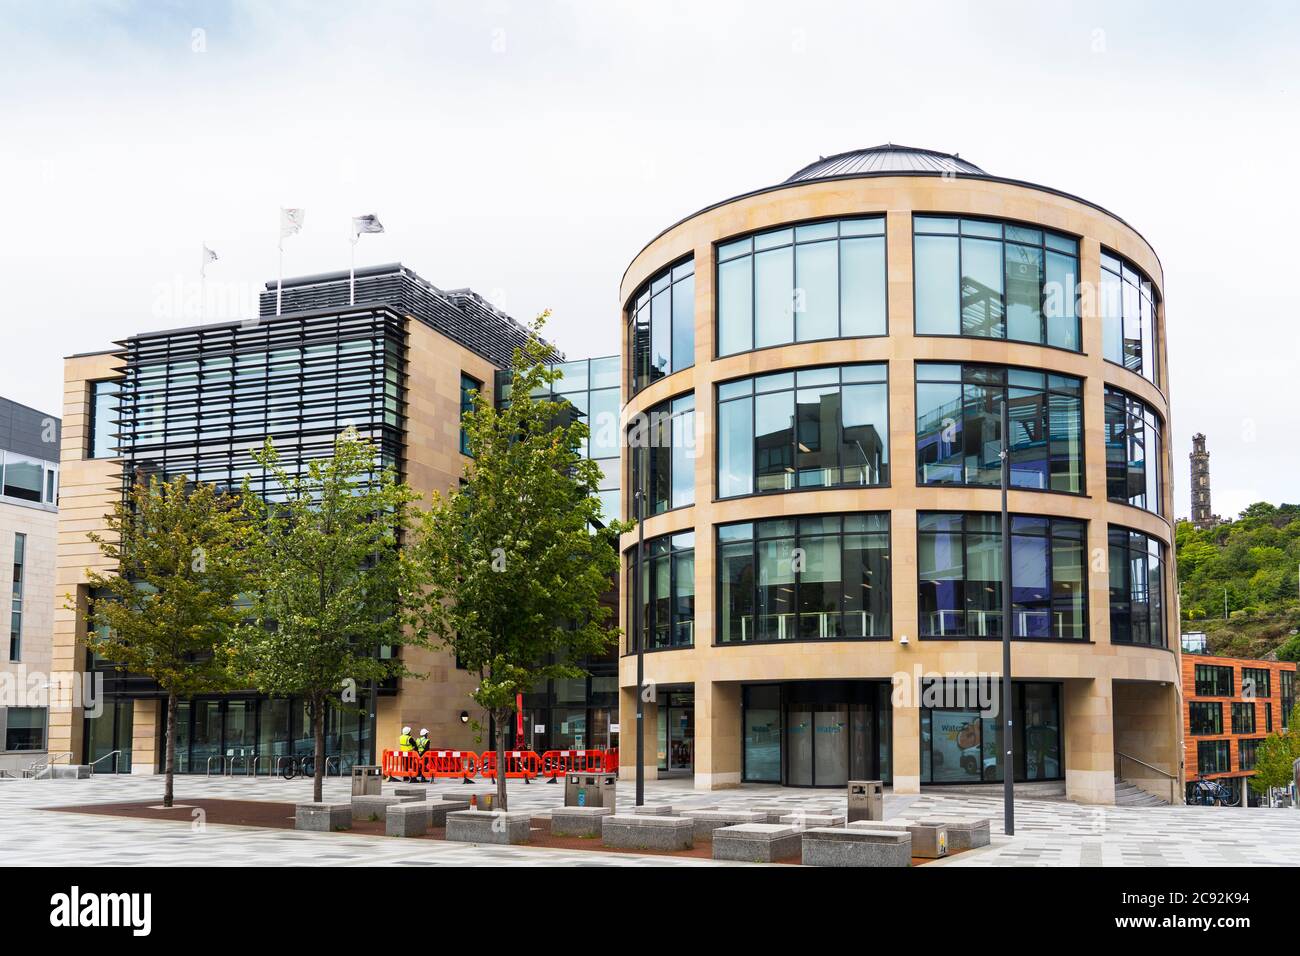 Edinburgh, Scotland, UK. 28 July, 2020. View of new Queen Elizabeth House in Edinburgh. Several UK Government departments are to move into the new offices and the Prime Minister has proposed that Cabinet meetings are held here in future.  Iain Masterton/Alamy Live News Stock Photo